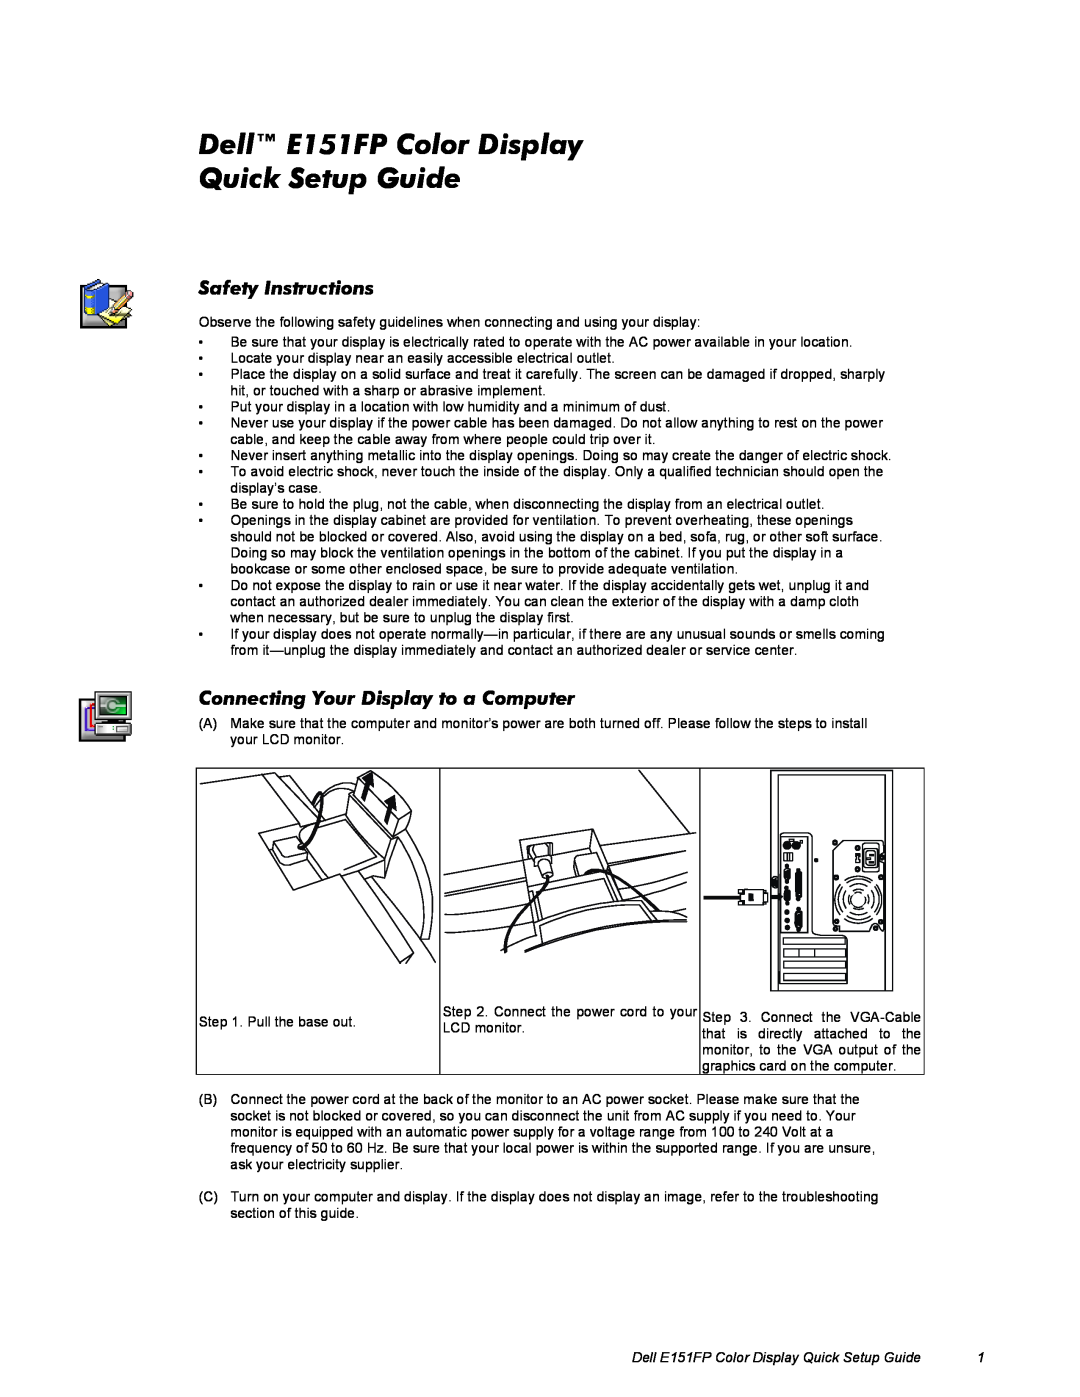 Dell E151FP setup guide Safety Instructions, Connecting Your Display to a Computer 